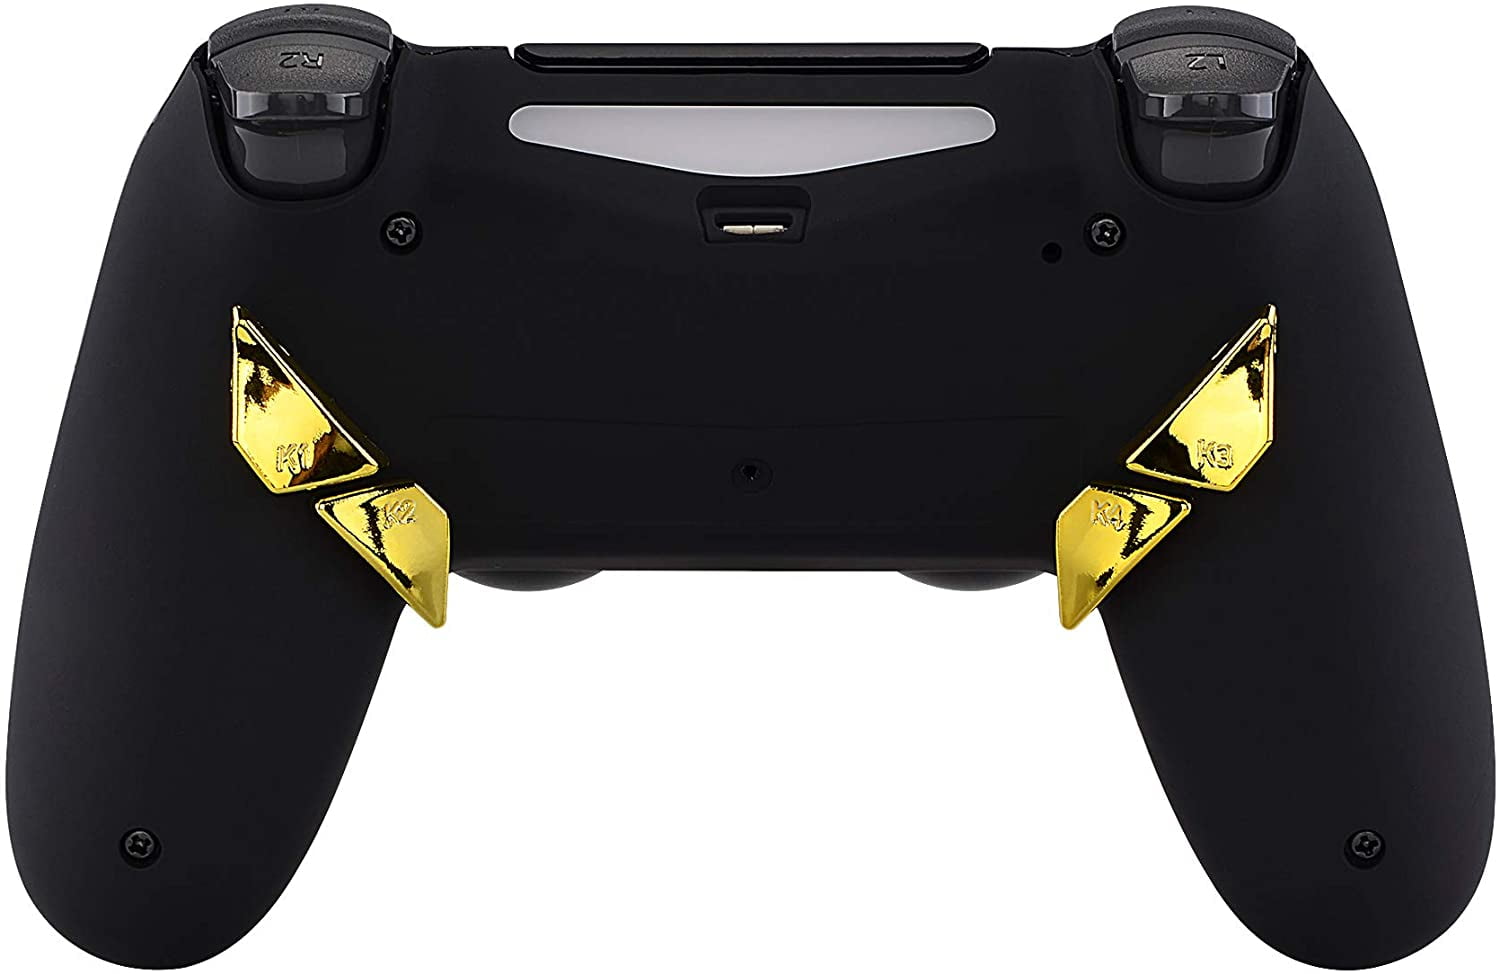 ps4 controller paddles